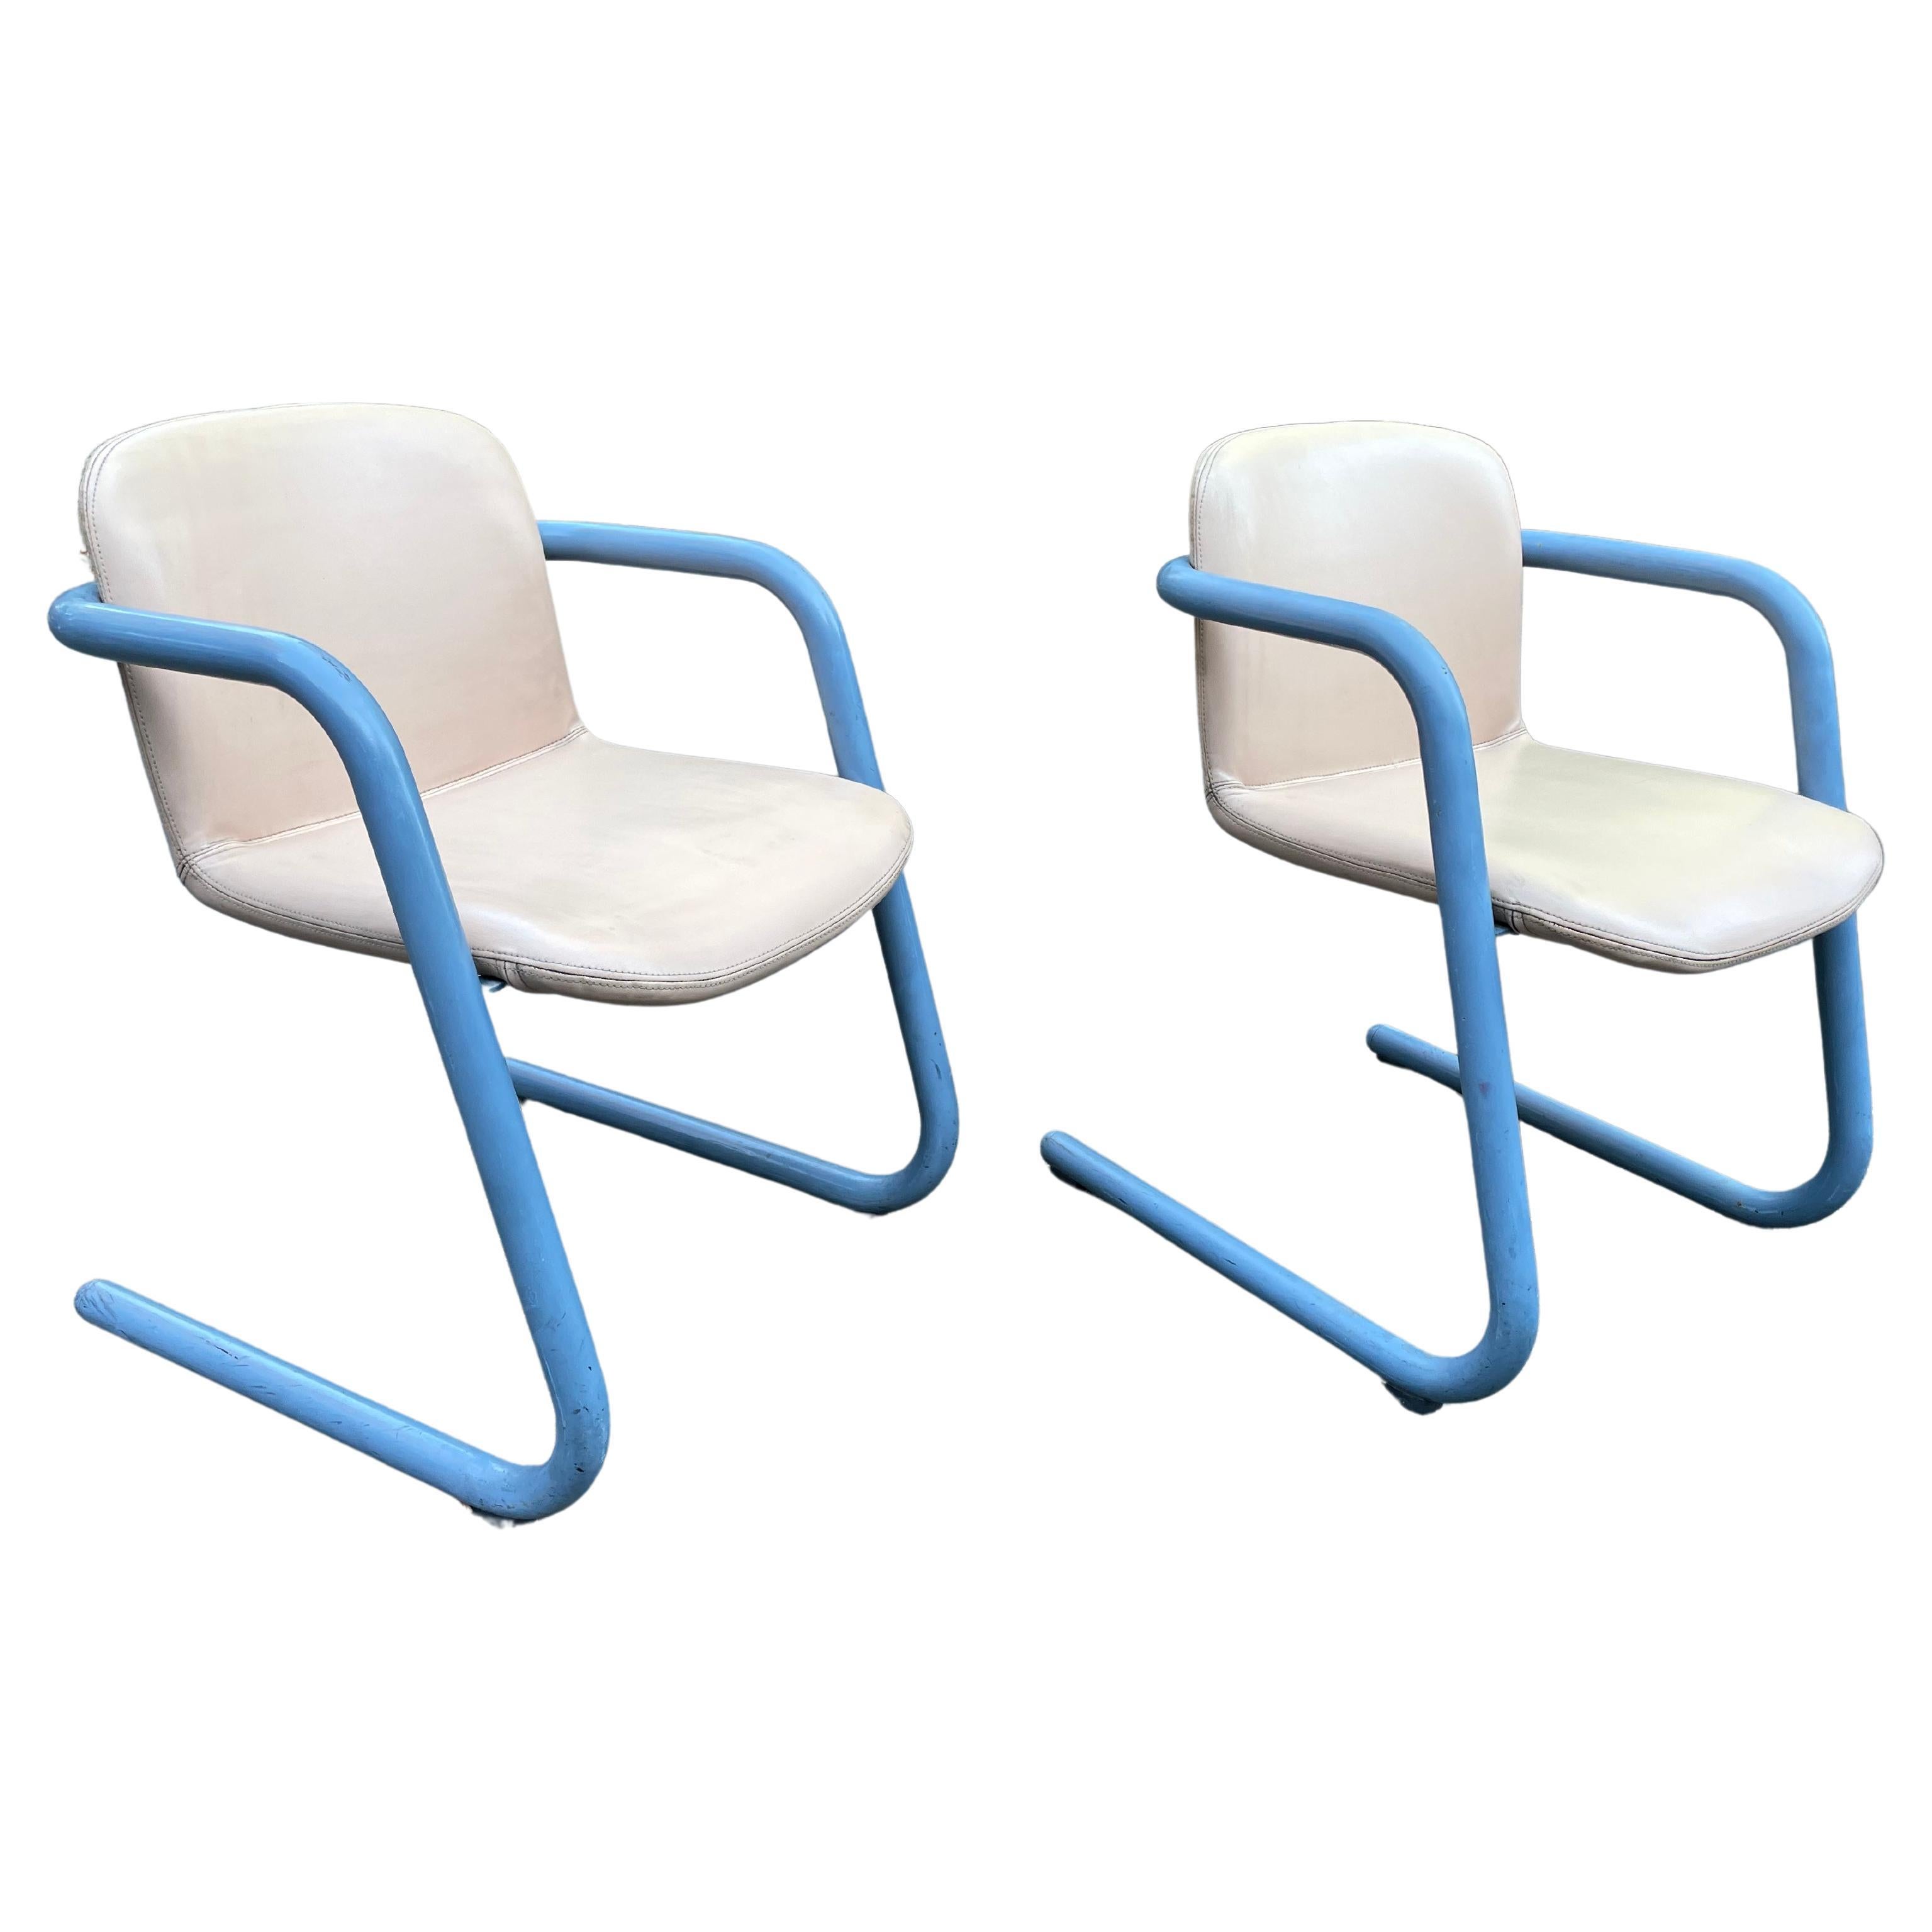 Mid-Century Kinetics Blue 100/300 Chairs by Salmon & Hamilton - Set of 2 In Good Condition For Sale In Los Angeles, CA